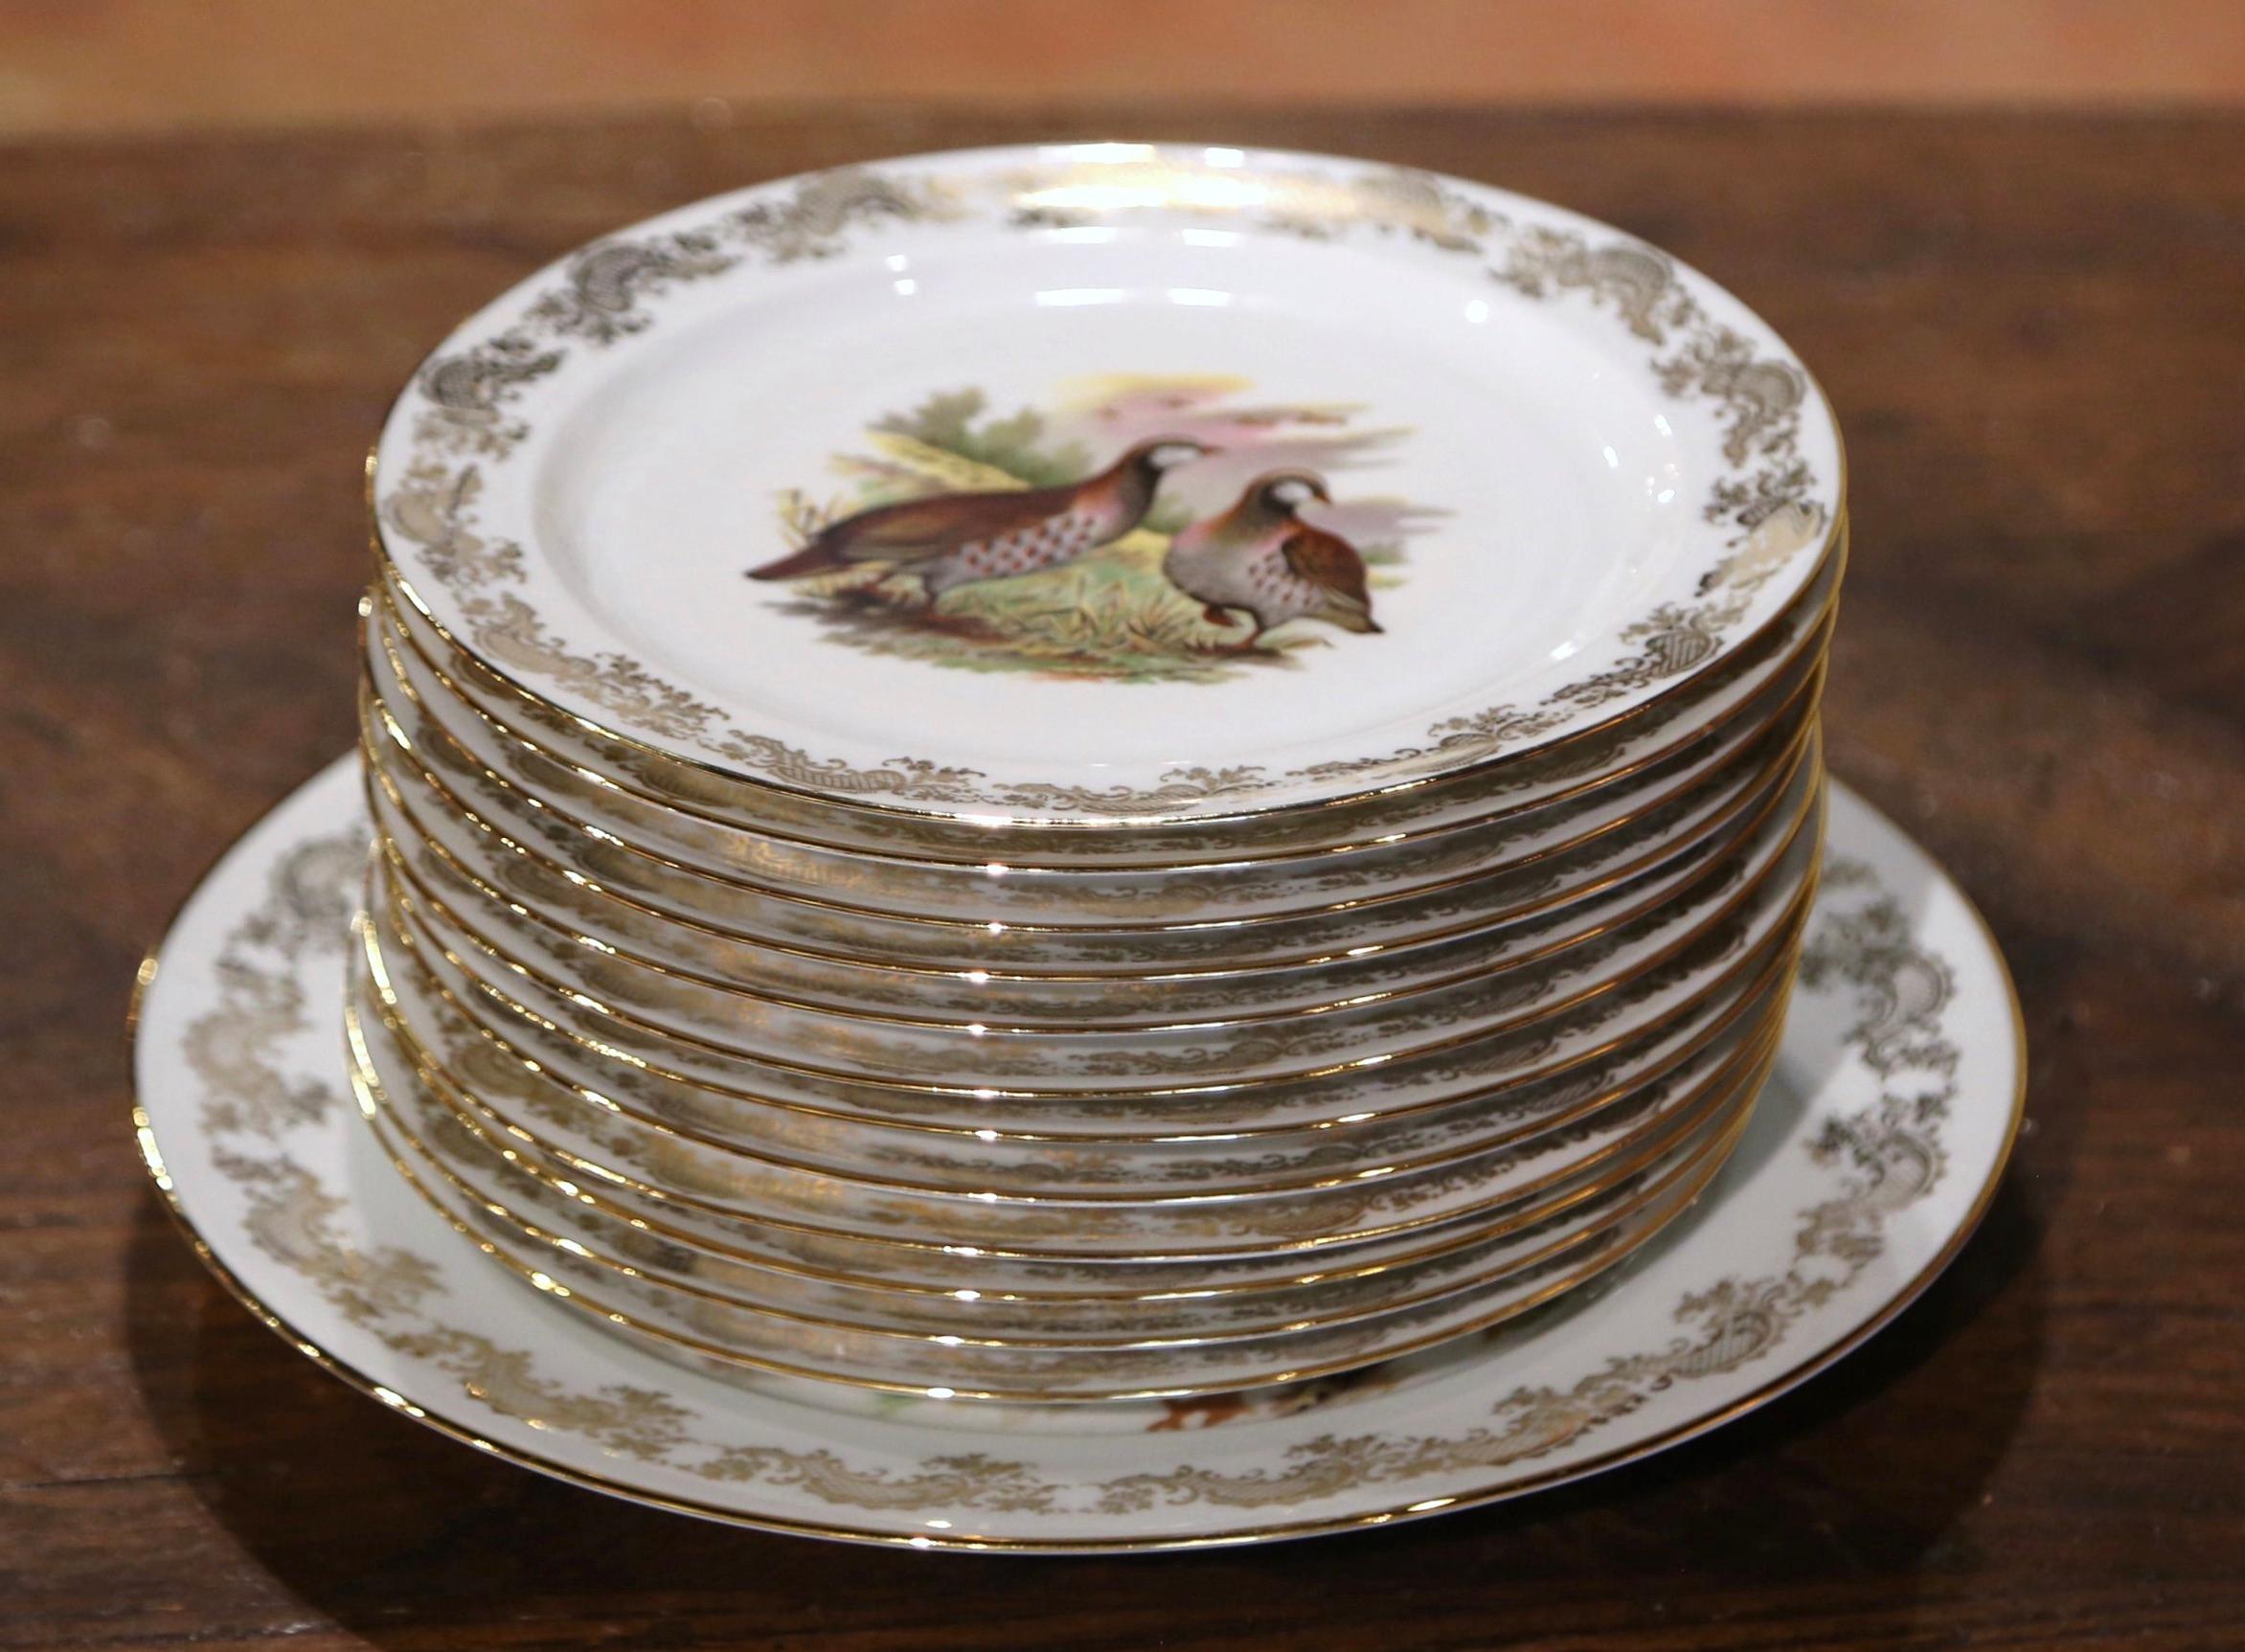 Decorate a vaisselier or a shelf with this colorful set of twelve (12) porcelain plates and the matching platter. Crafted in Limoges France, and signed underfoot by the artist, Benoit, each piece is decorated with gilt floral lace border, and